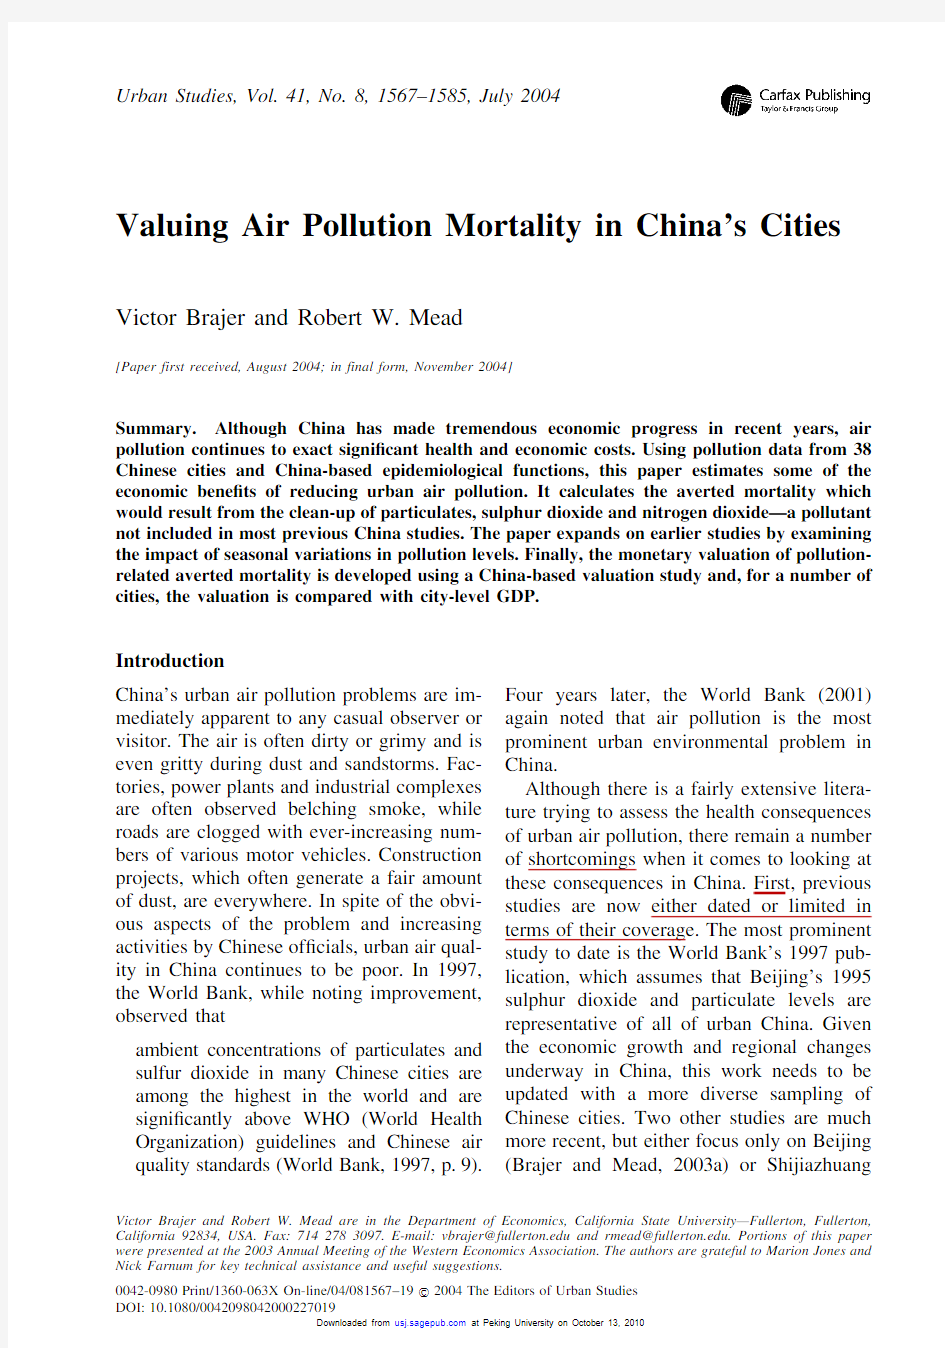 Valuing Air Pollution Mortality in China's Cities